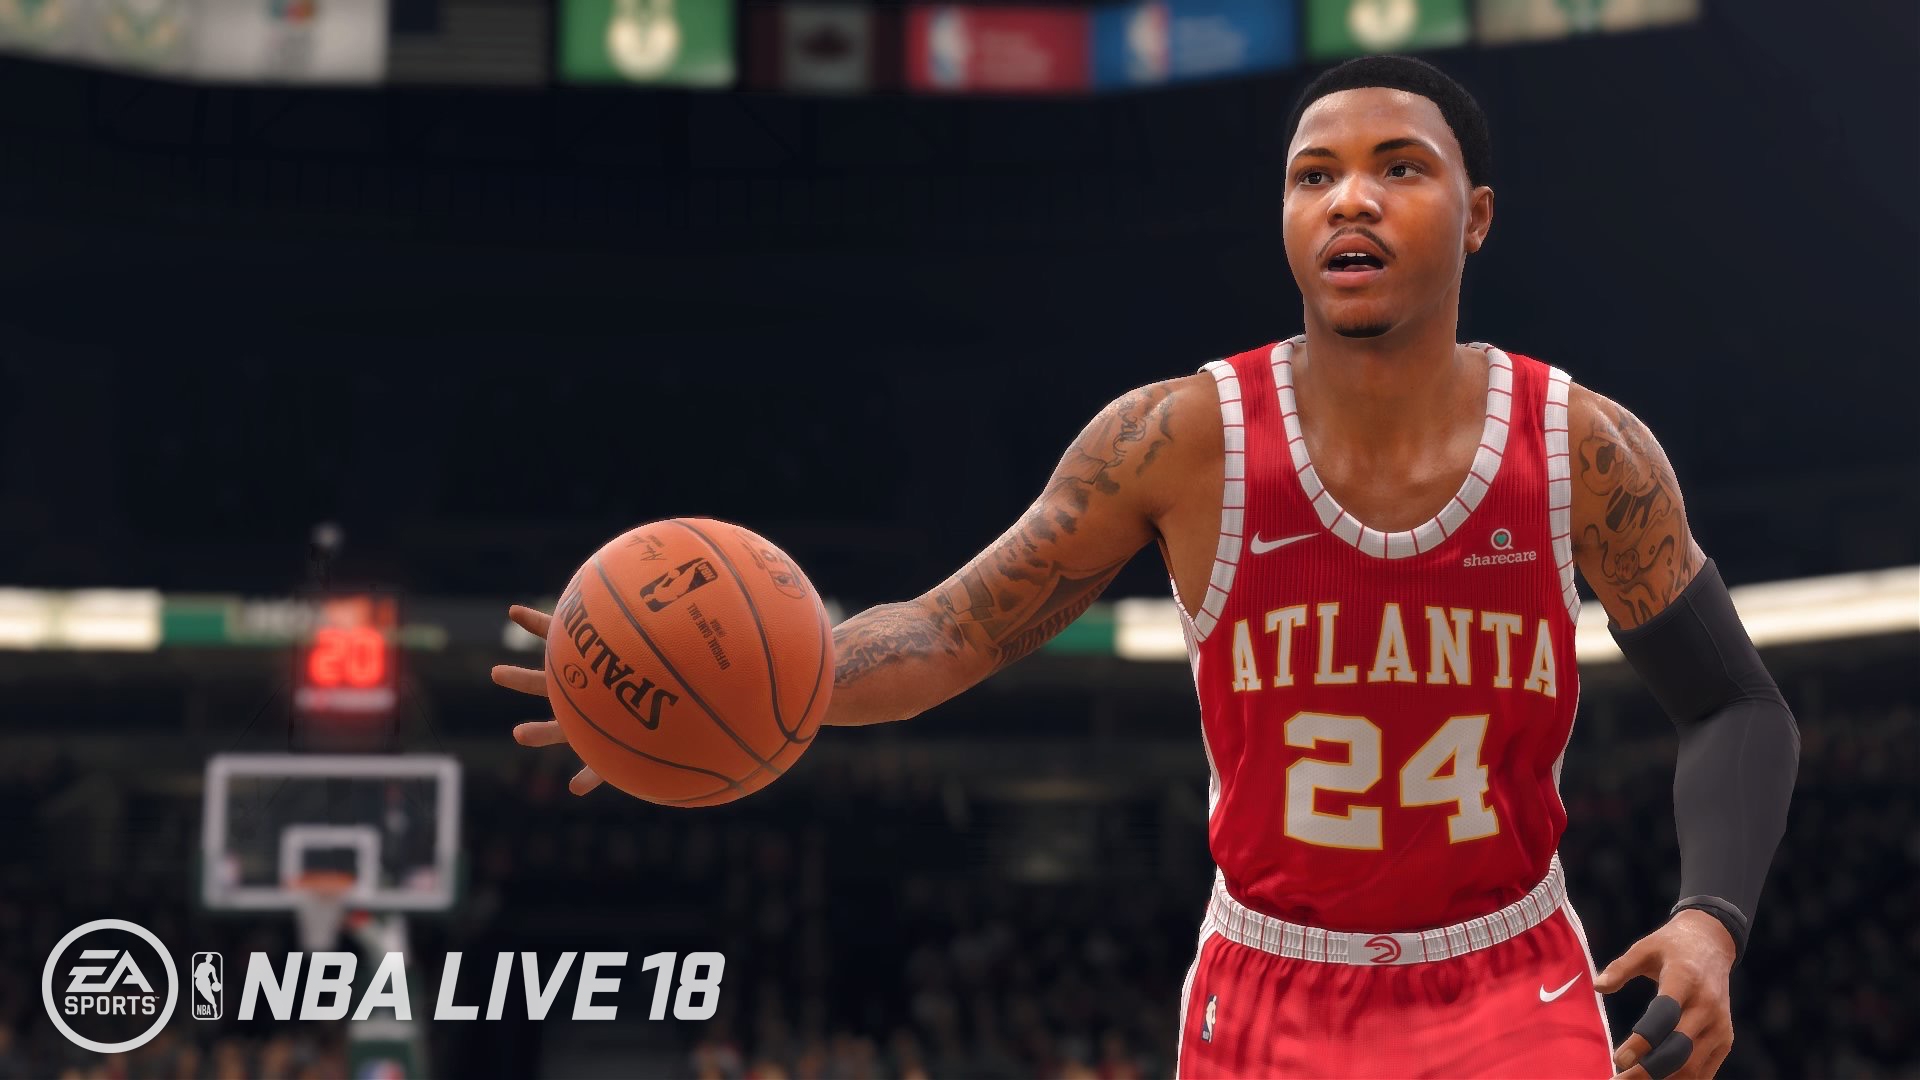 NBA Live 18 1.10 Update Patch Notes Have Arrived On PS4 And Xbox One